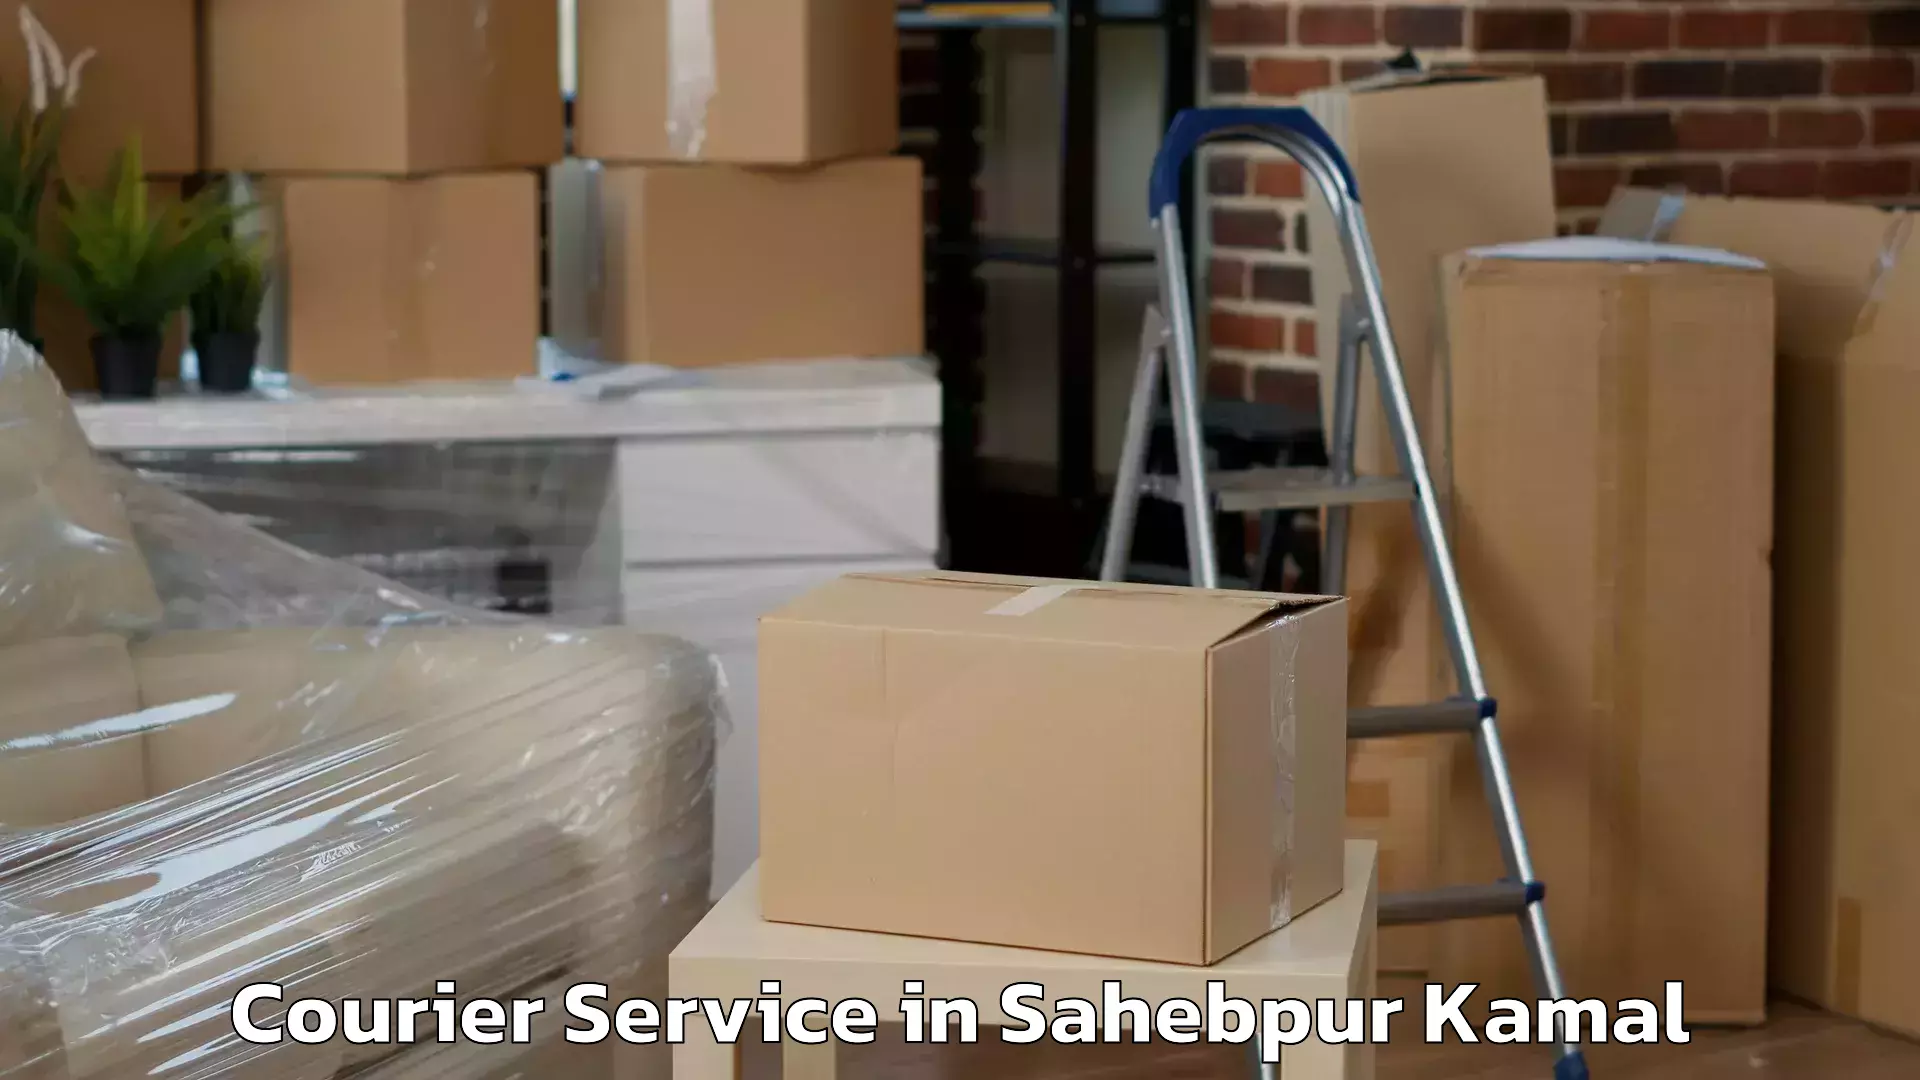 Business courier solutions in Sahebpur Kamal